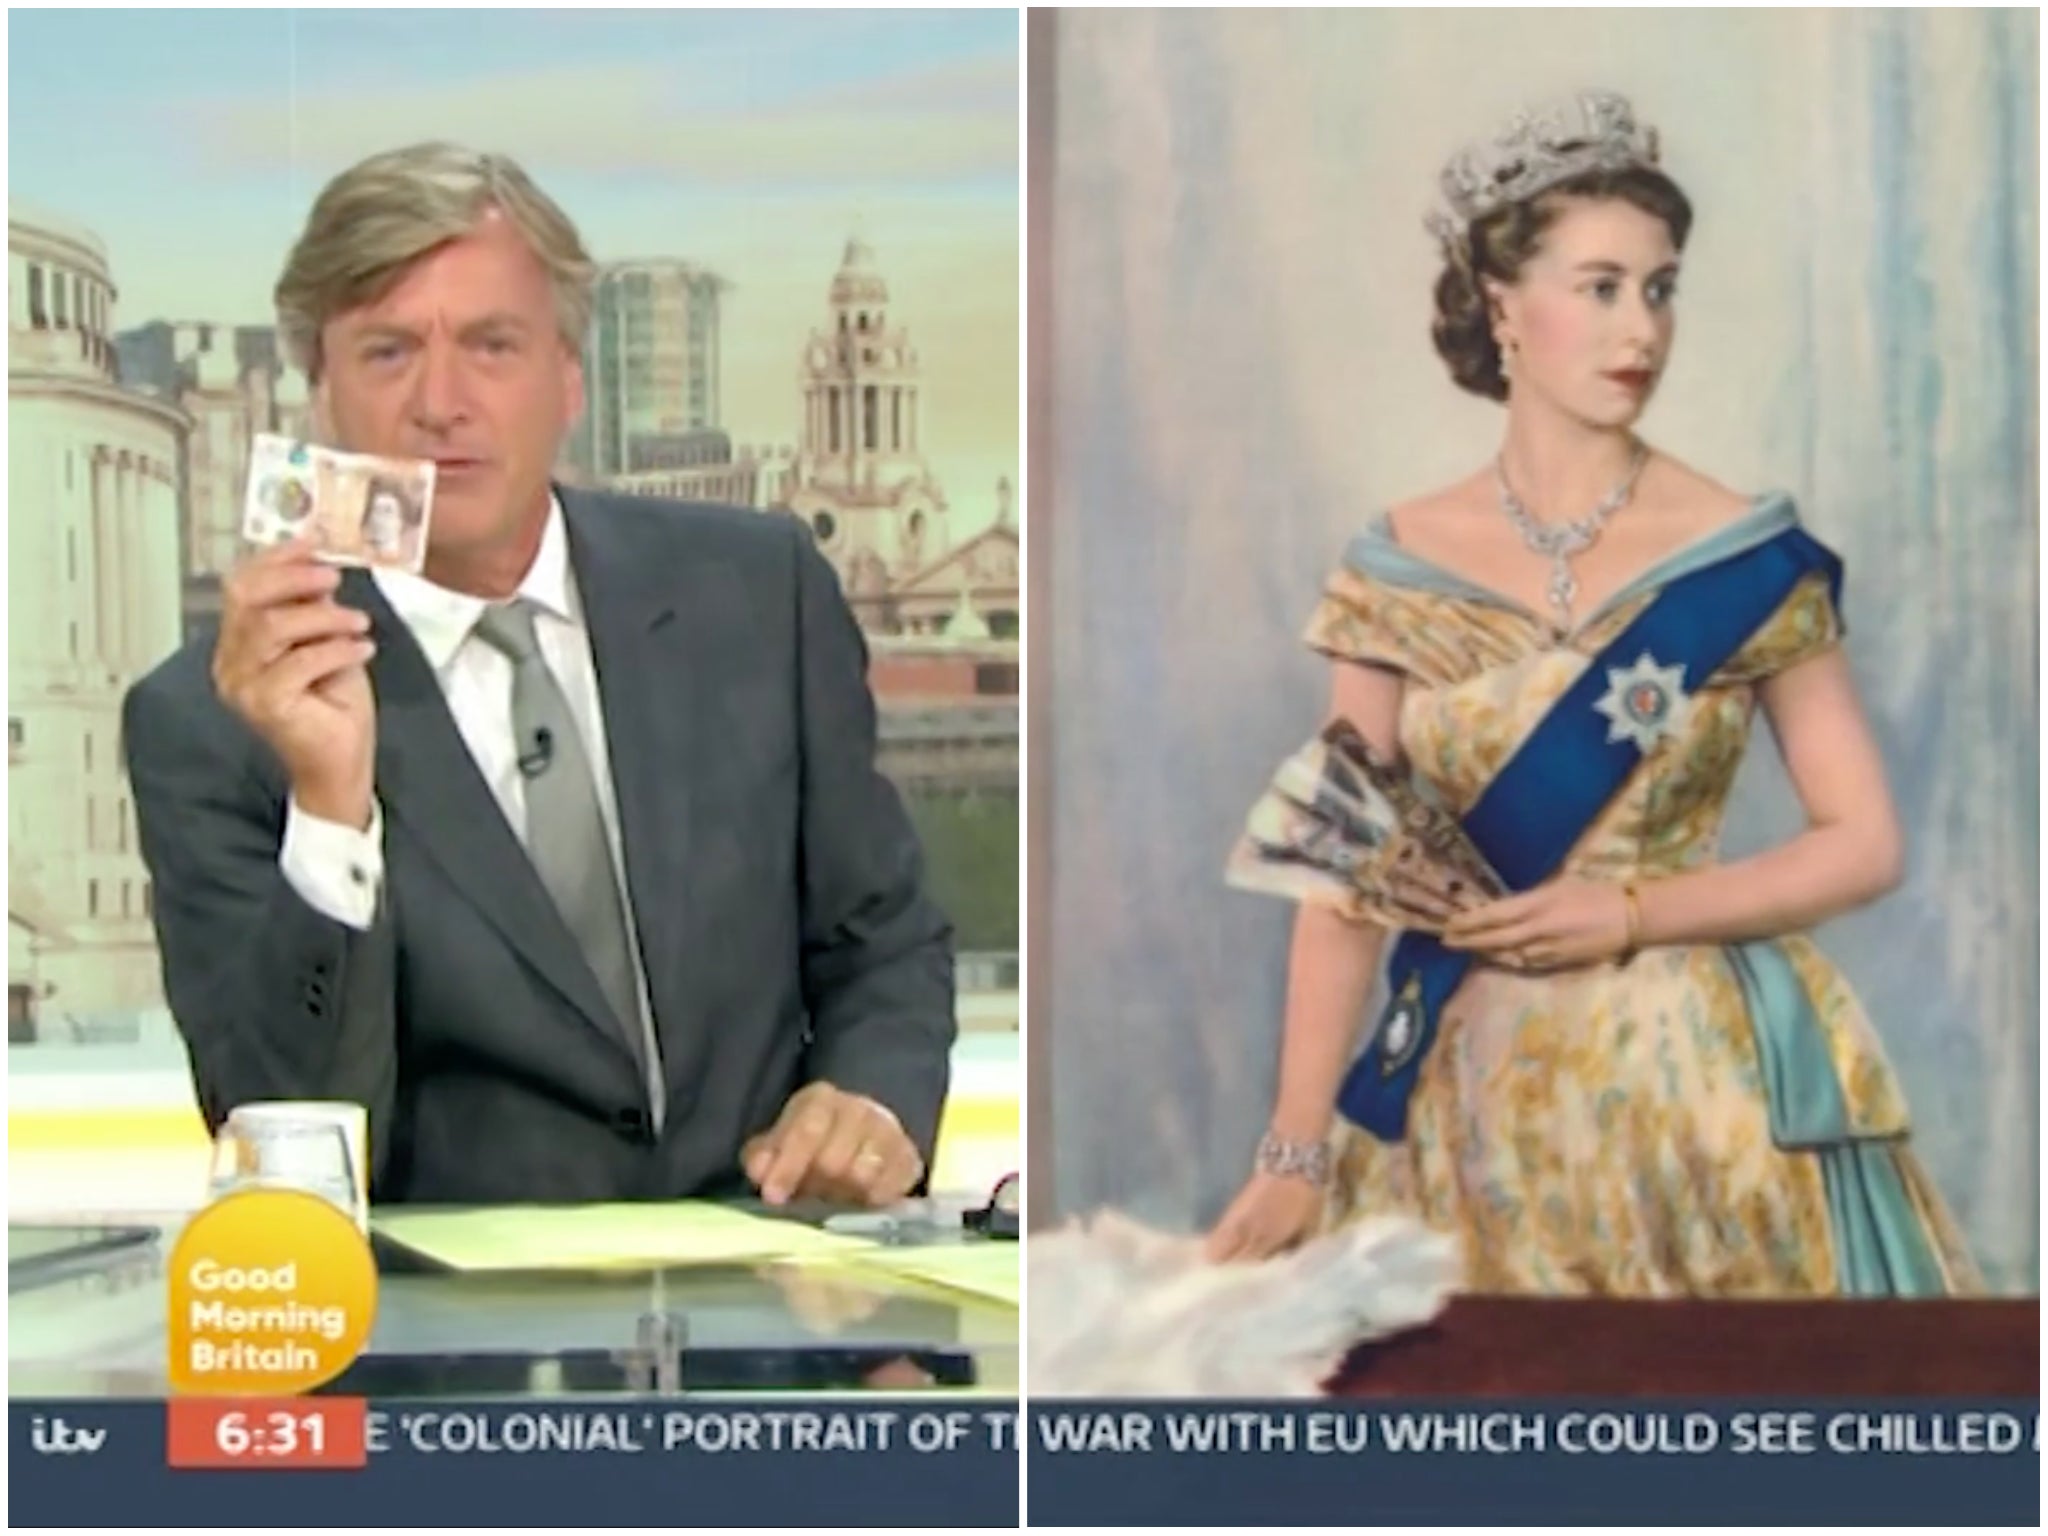 Richard Madeley holds aloft a £10 note in rant about portrait of the Queen on ‘Good Morning Britain'